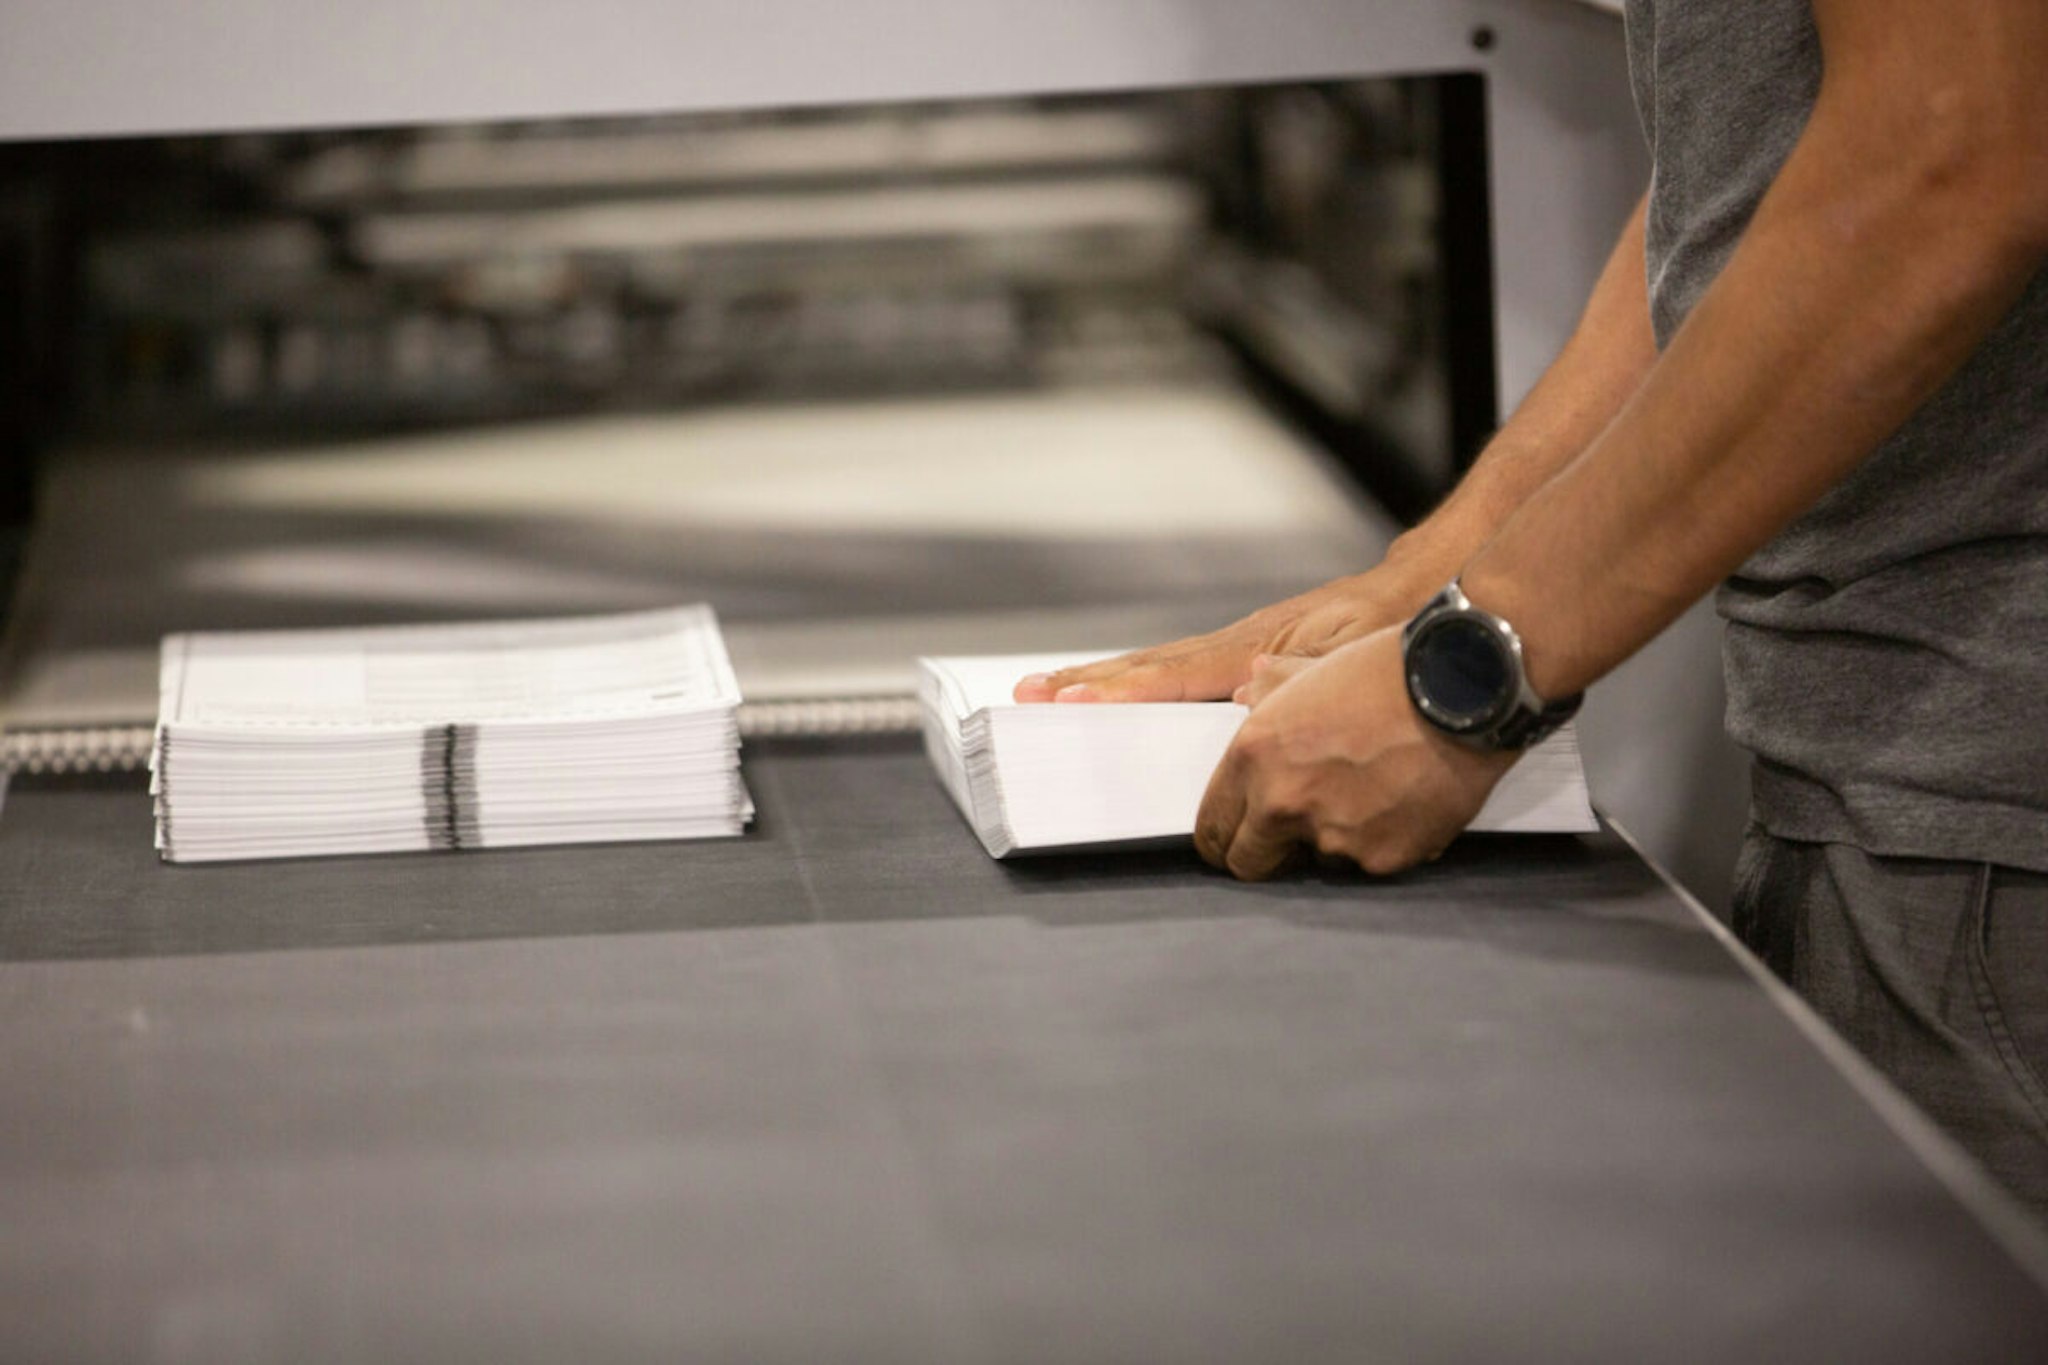 A worker straightens a stack of ballots as they come off the printer at the Runbeck Election Services facility in Phoenix, Arizona, U.S., on Tuesday, June 23, 2020.